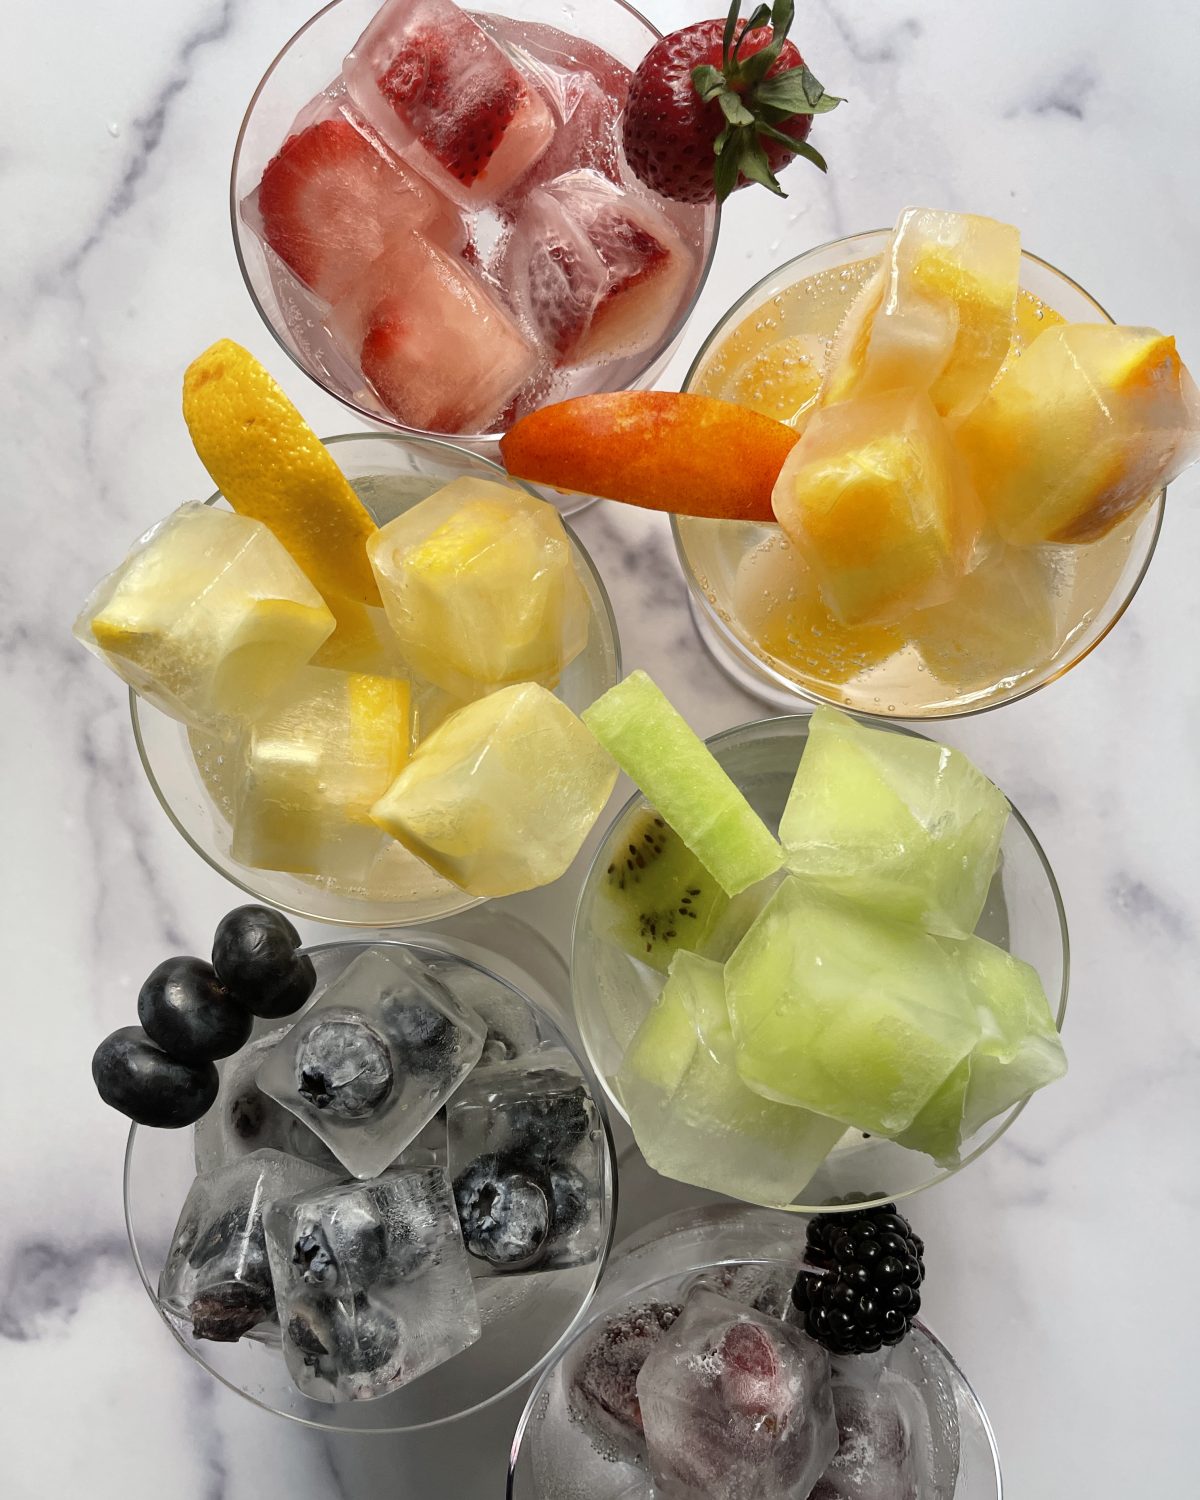 Rainbow Fruit Ice Cubes + Tips For Making Clear Ice - Vega Recepten